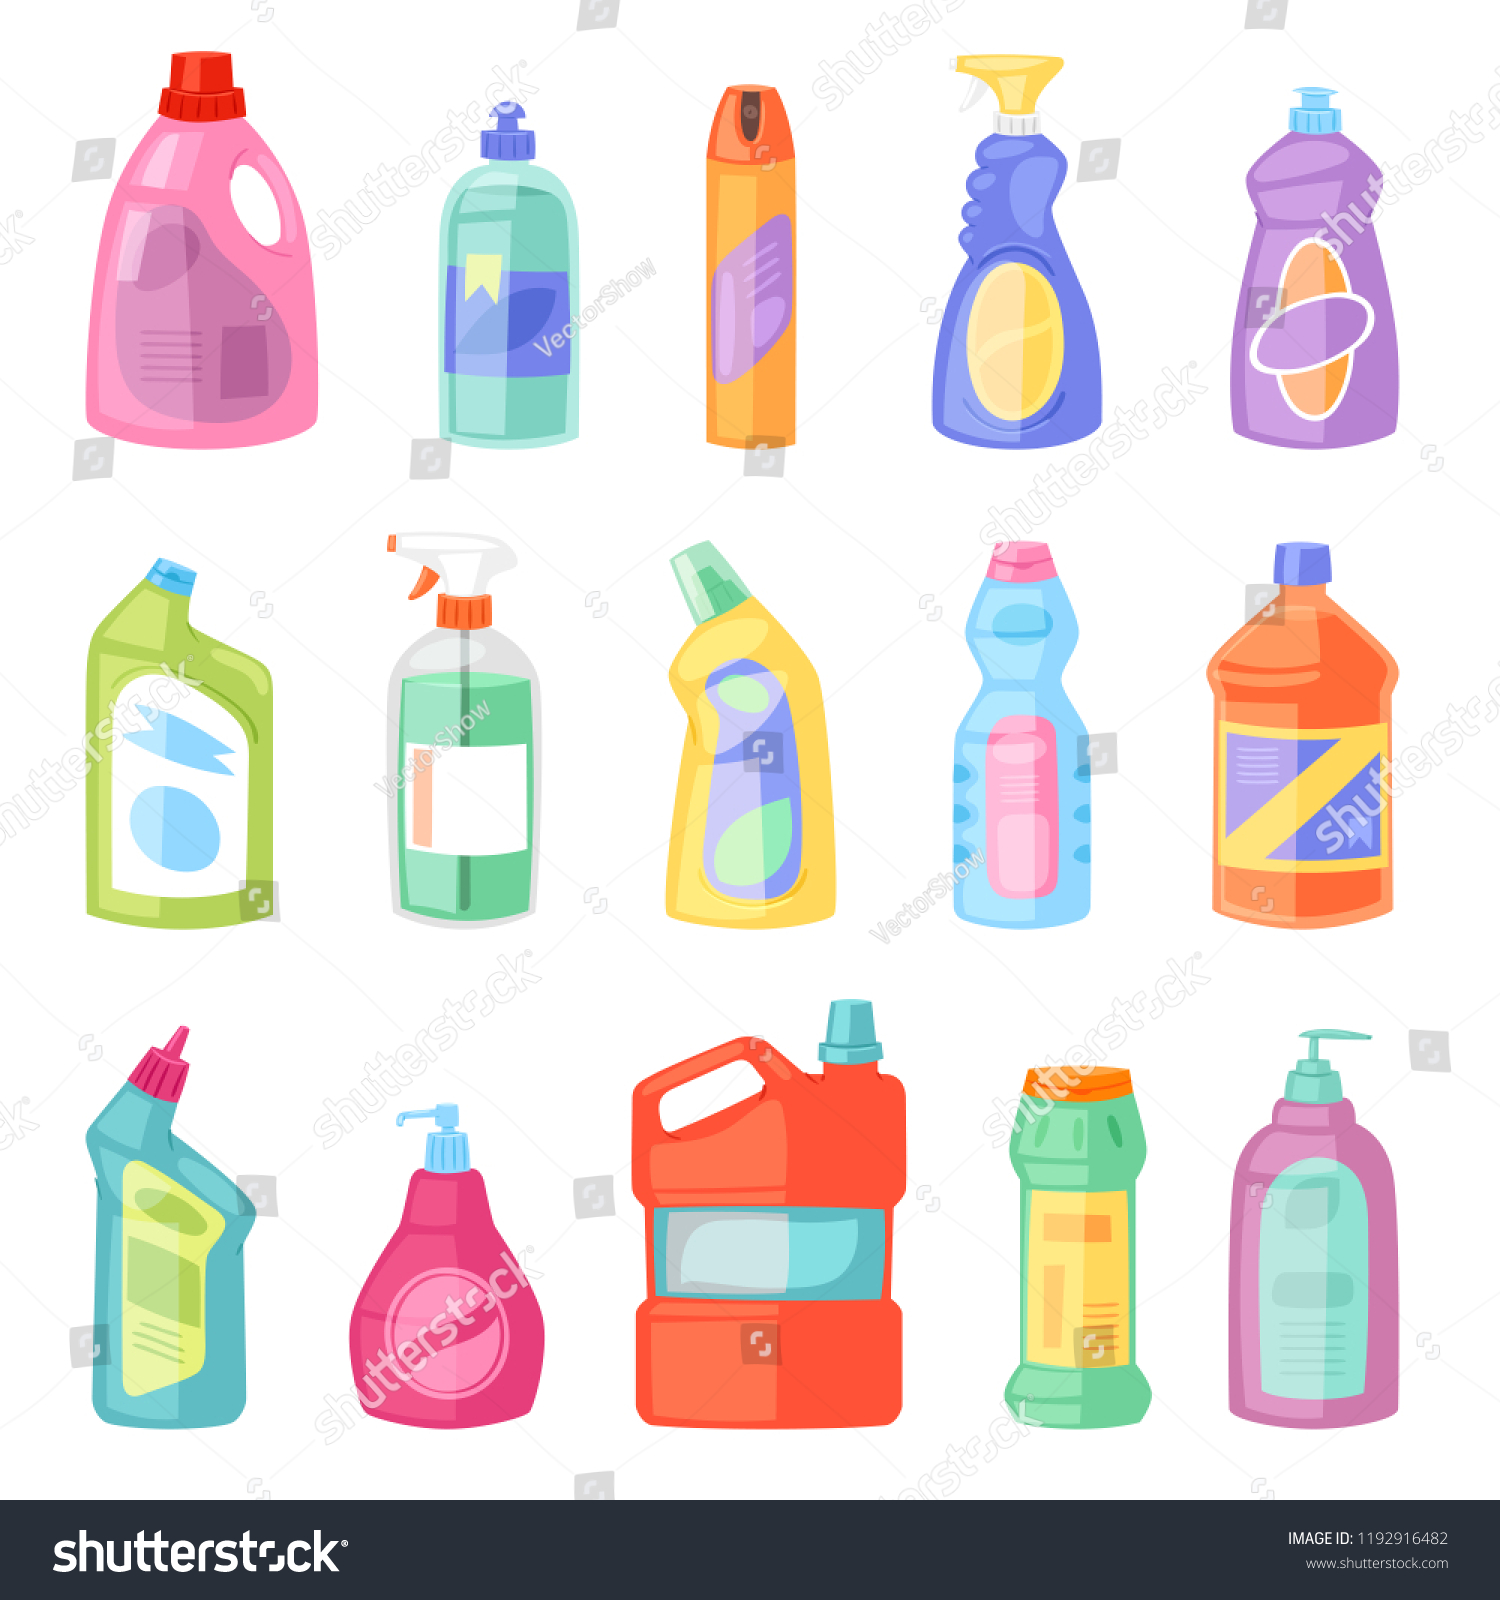 Download Detergent Bottle Vector Plastic Blank Container Stock Vector Royalty Free 1192916482